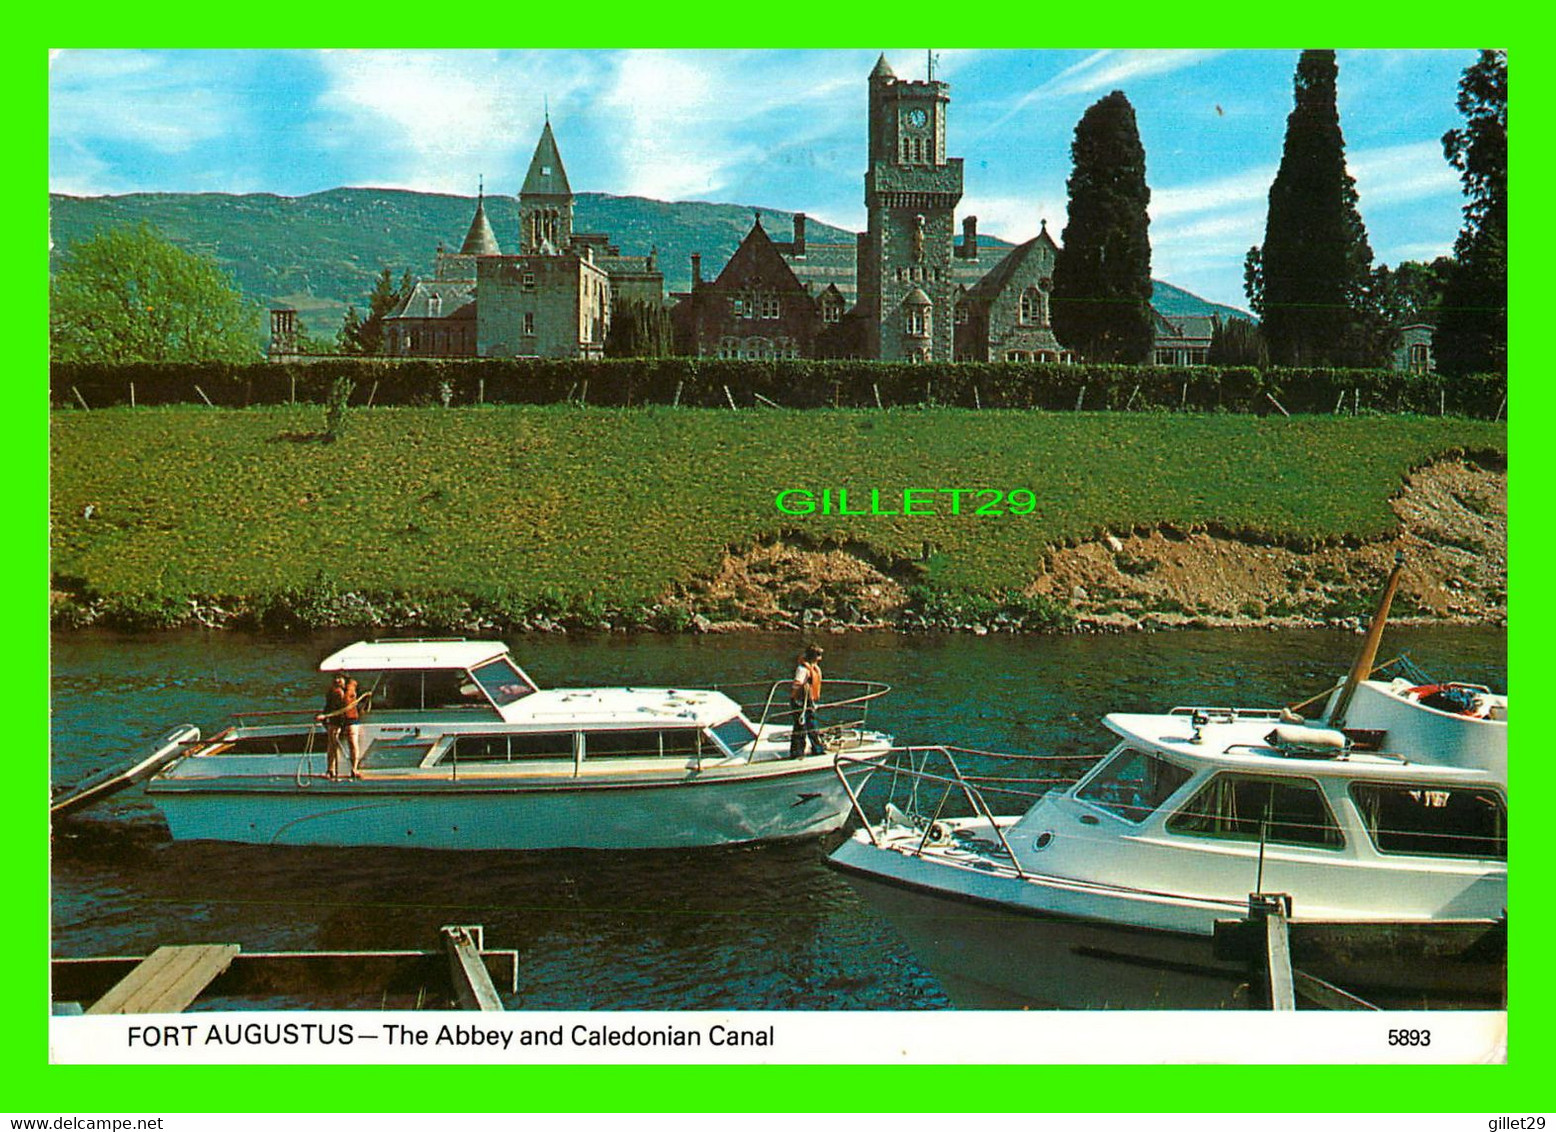 FORT AUGUSTUS, SCOTLAND - THE ABBEY AND CALEDONIAN CANAL - TRAVEL IN 1991 -  WHITEHOLME PUB. - - Inverness-shire